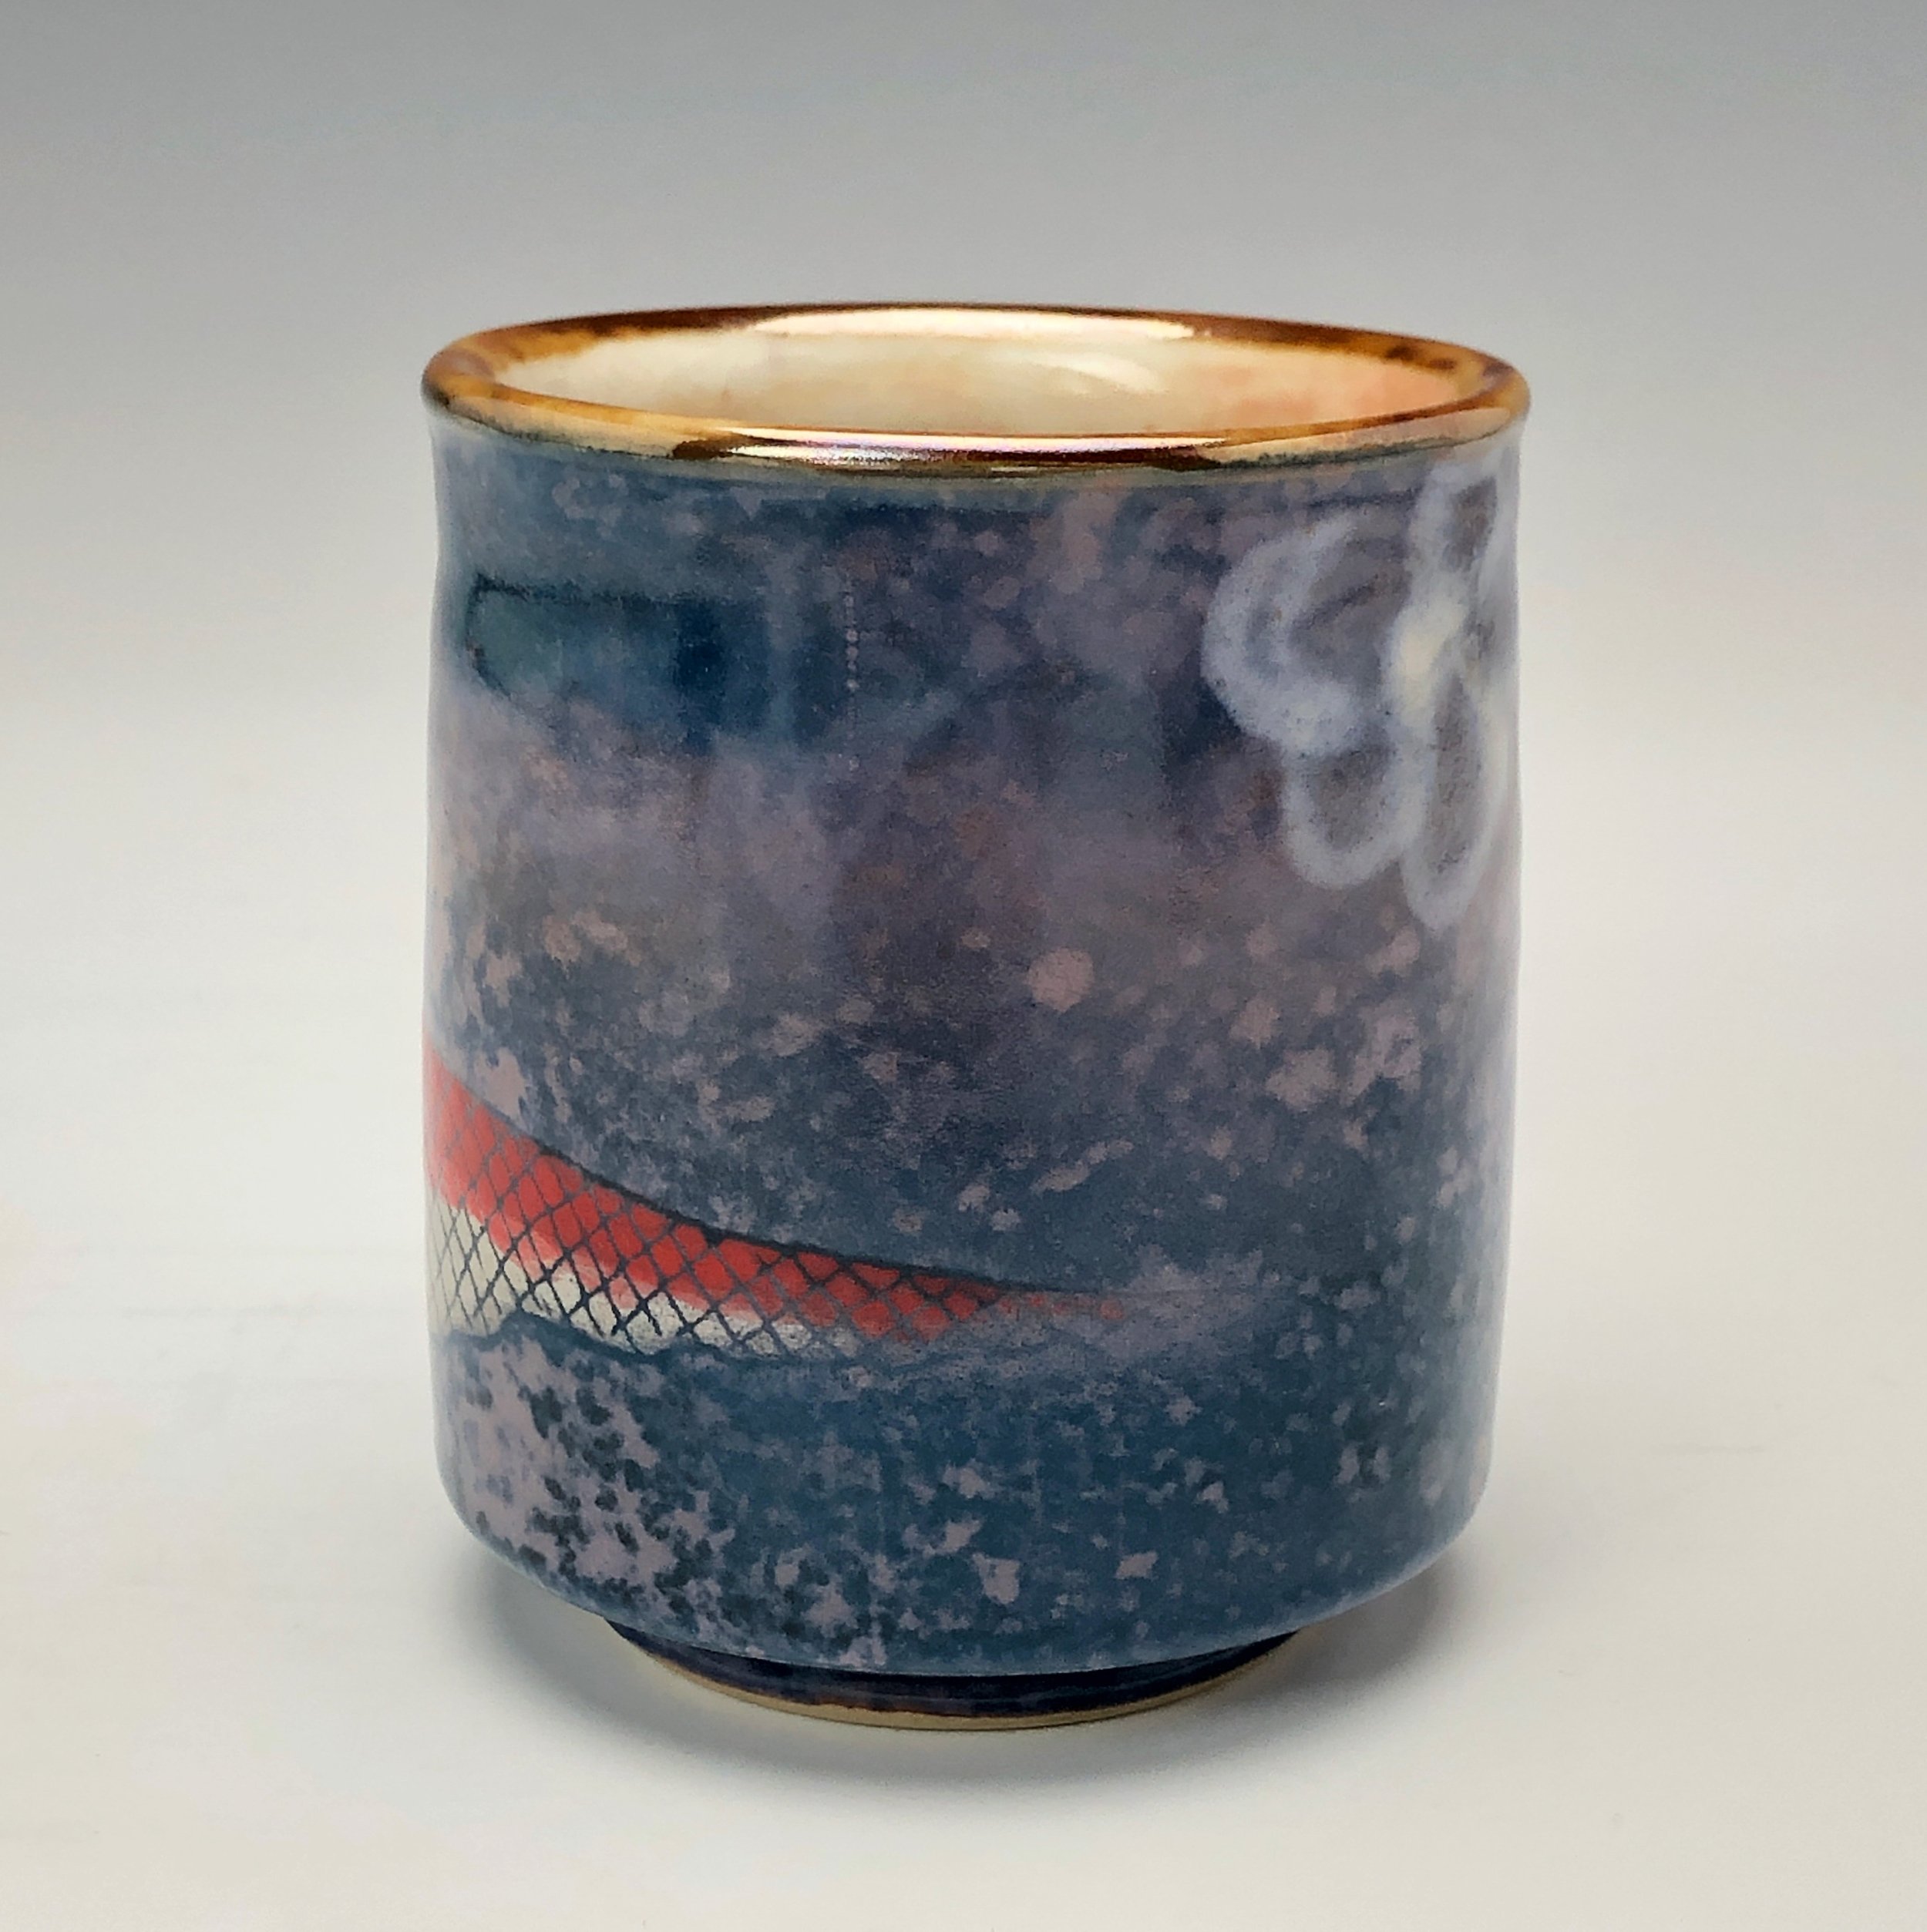  Bruce Gholson, Bulldog Pottery, Seagrove, North Carolina  Yunomi 4- Casual drinking cup made from porcelain. This cup is glazed with a lavender blue shino with a drawn fish in red over glaze. 